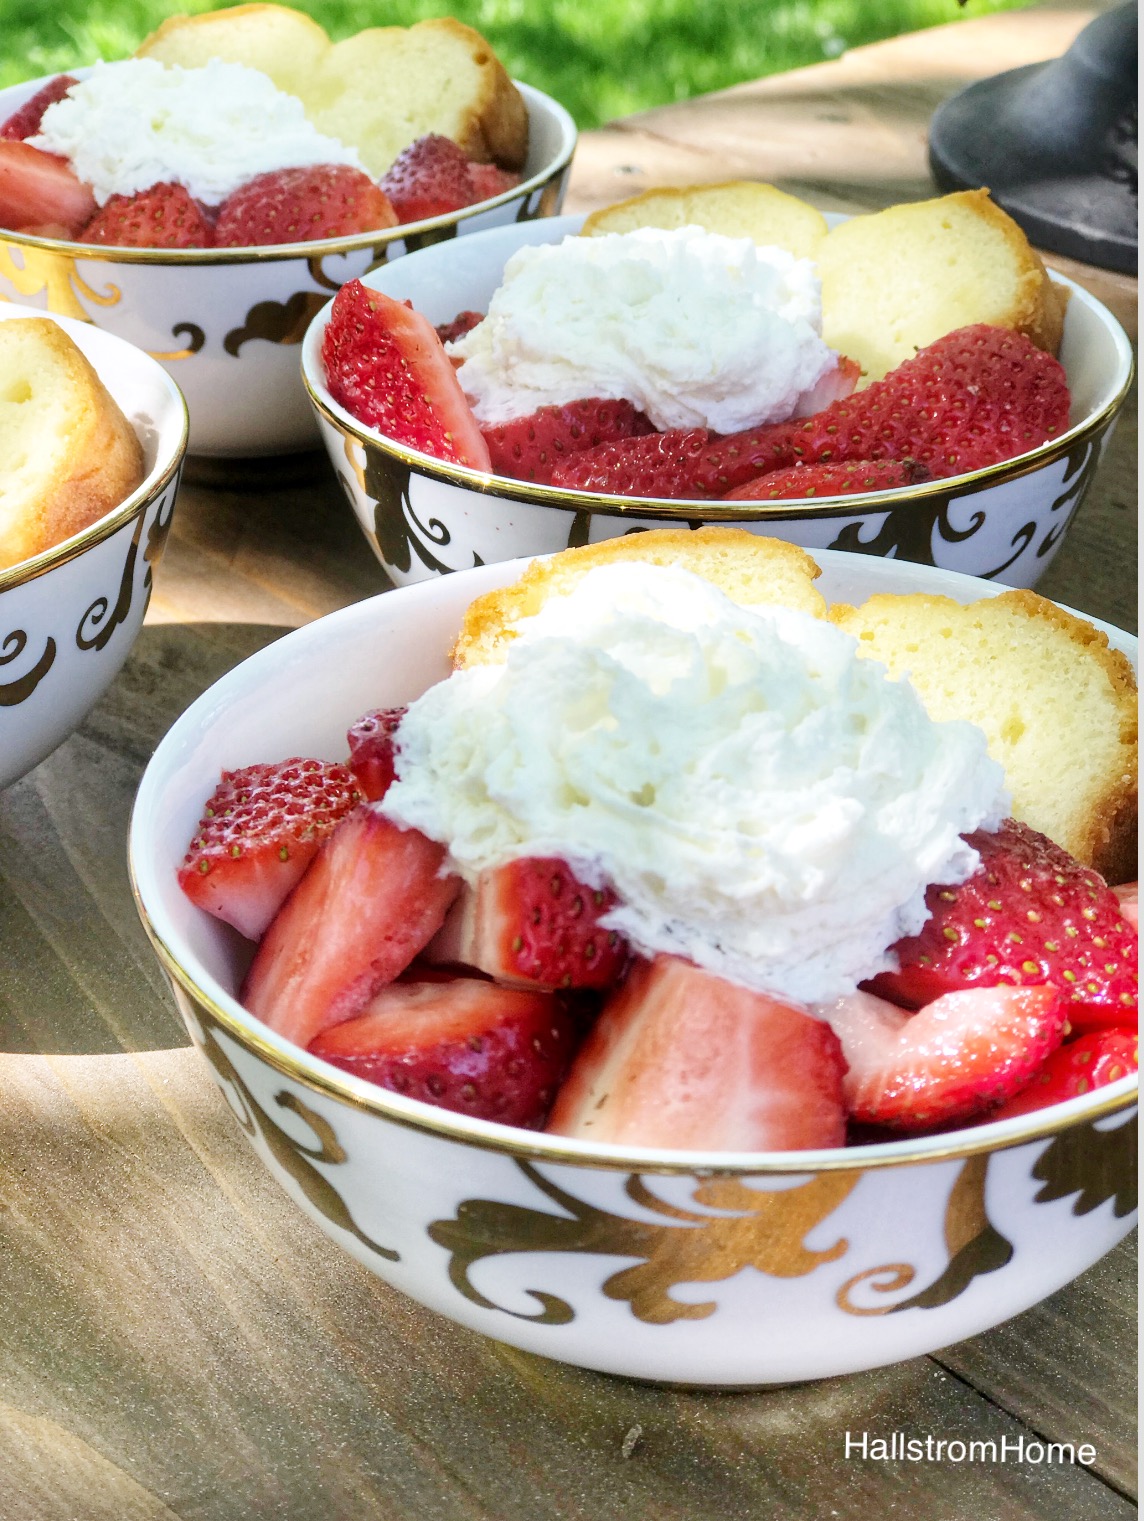 Strawberry Shortcake with a Twist / Cake For Strawberry Shortcake Recipe / Homemade Strawberry Shortcake Recipe / Easy Strawberry Shortcake / HallstromHome